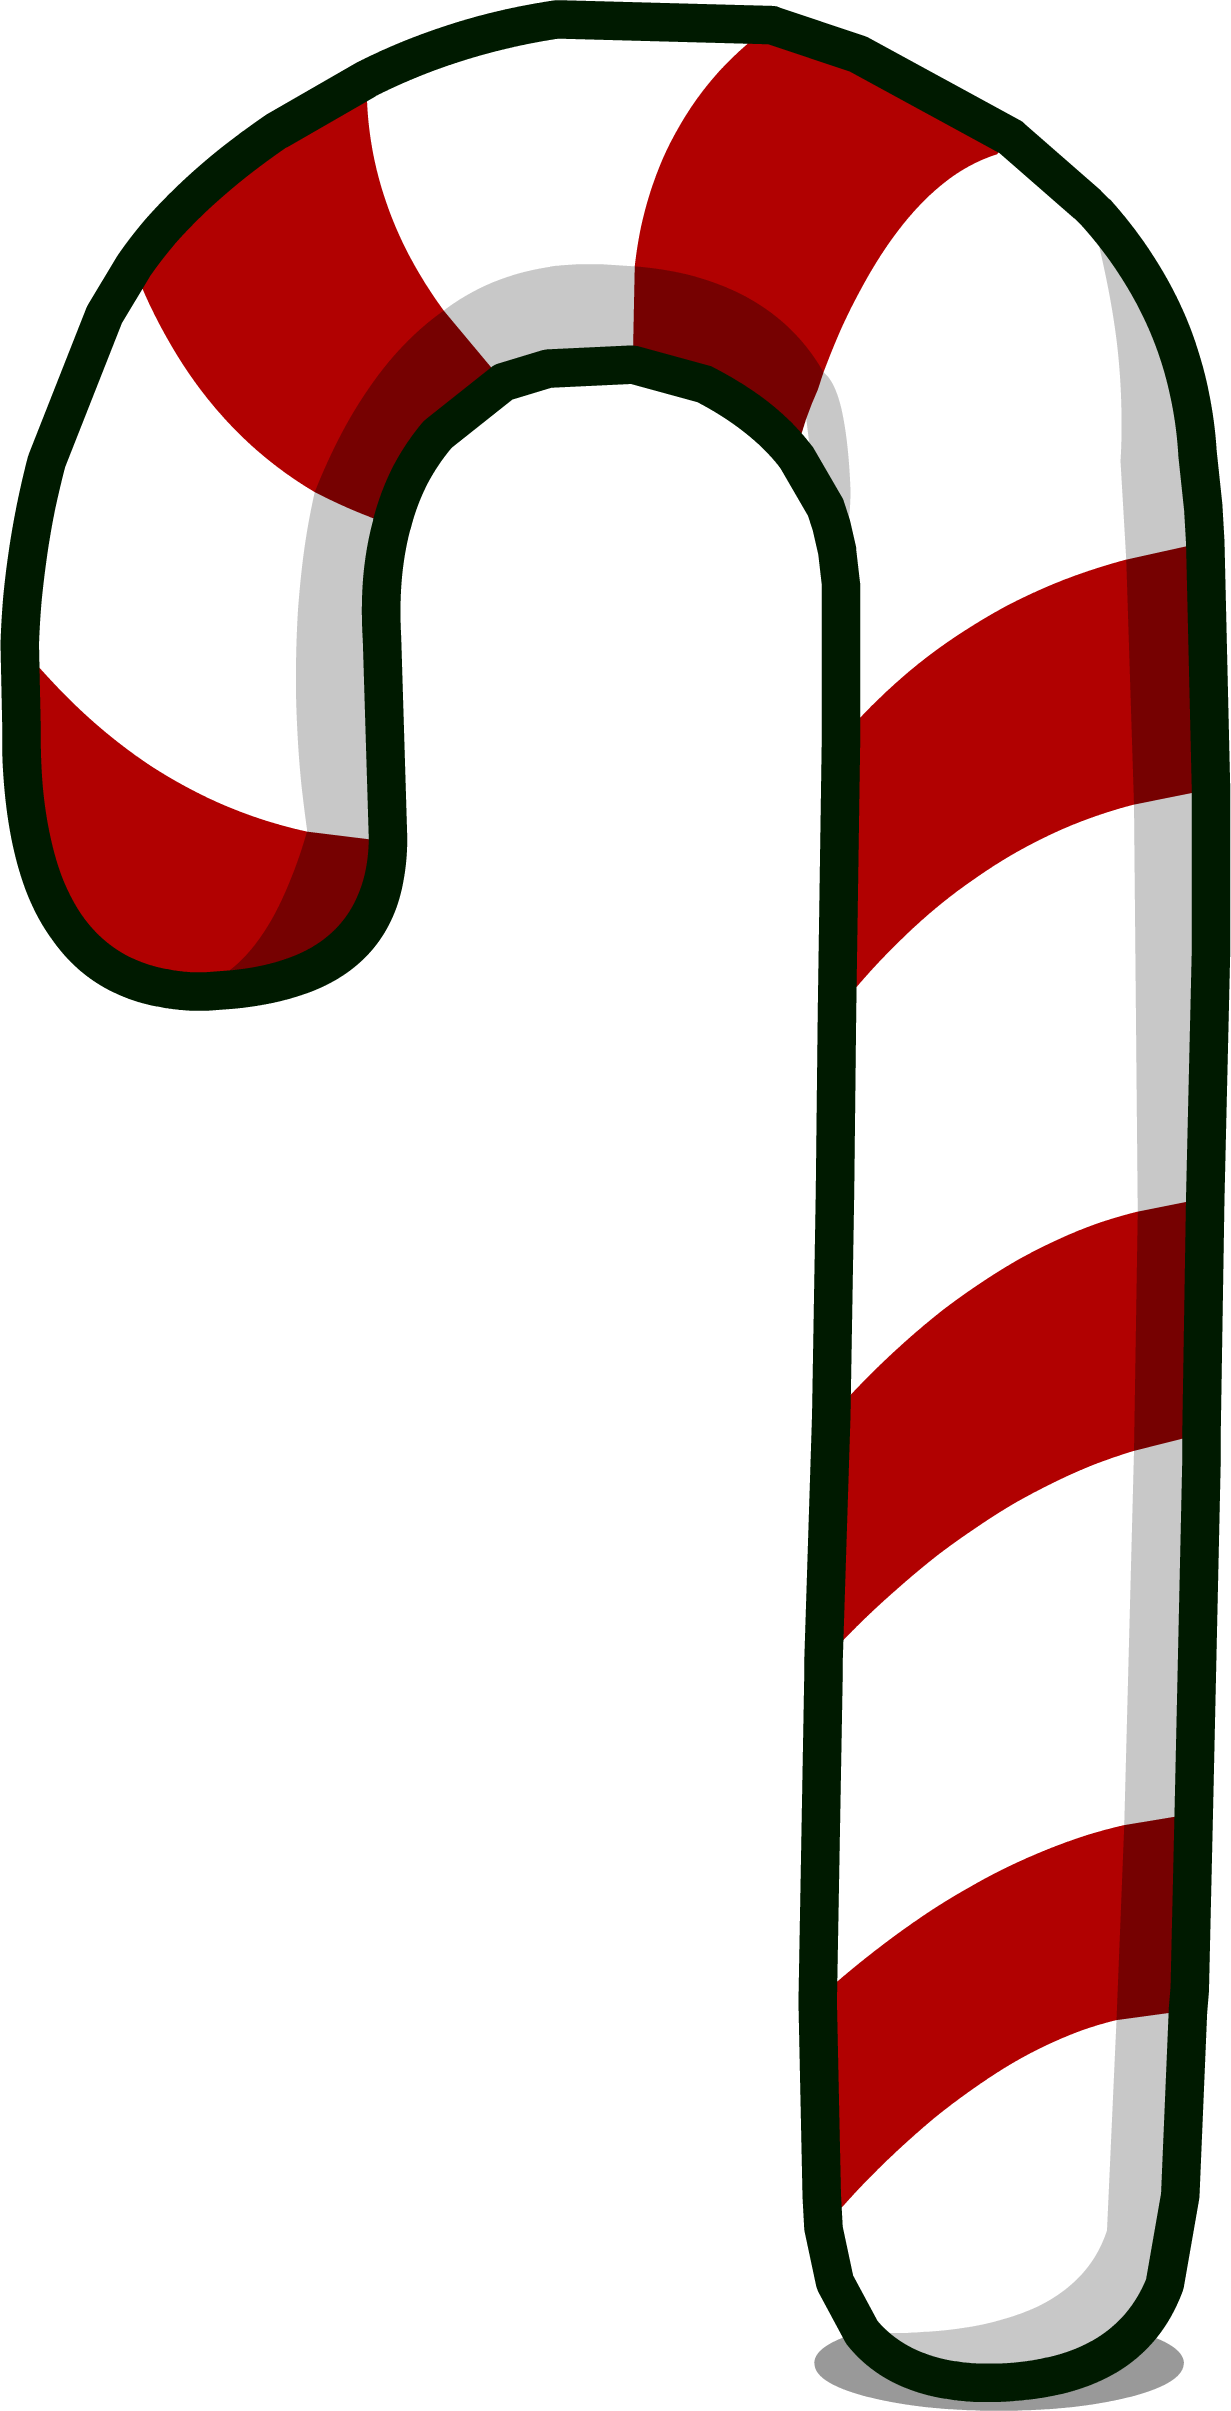 Candy Cane Download PNG Image